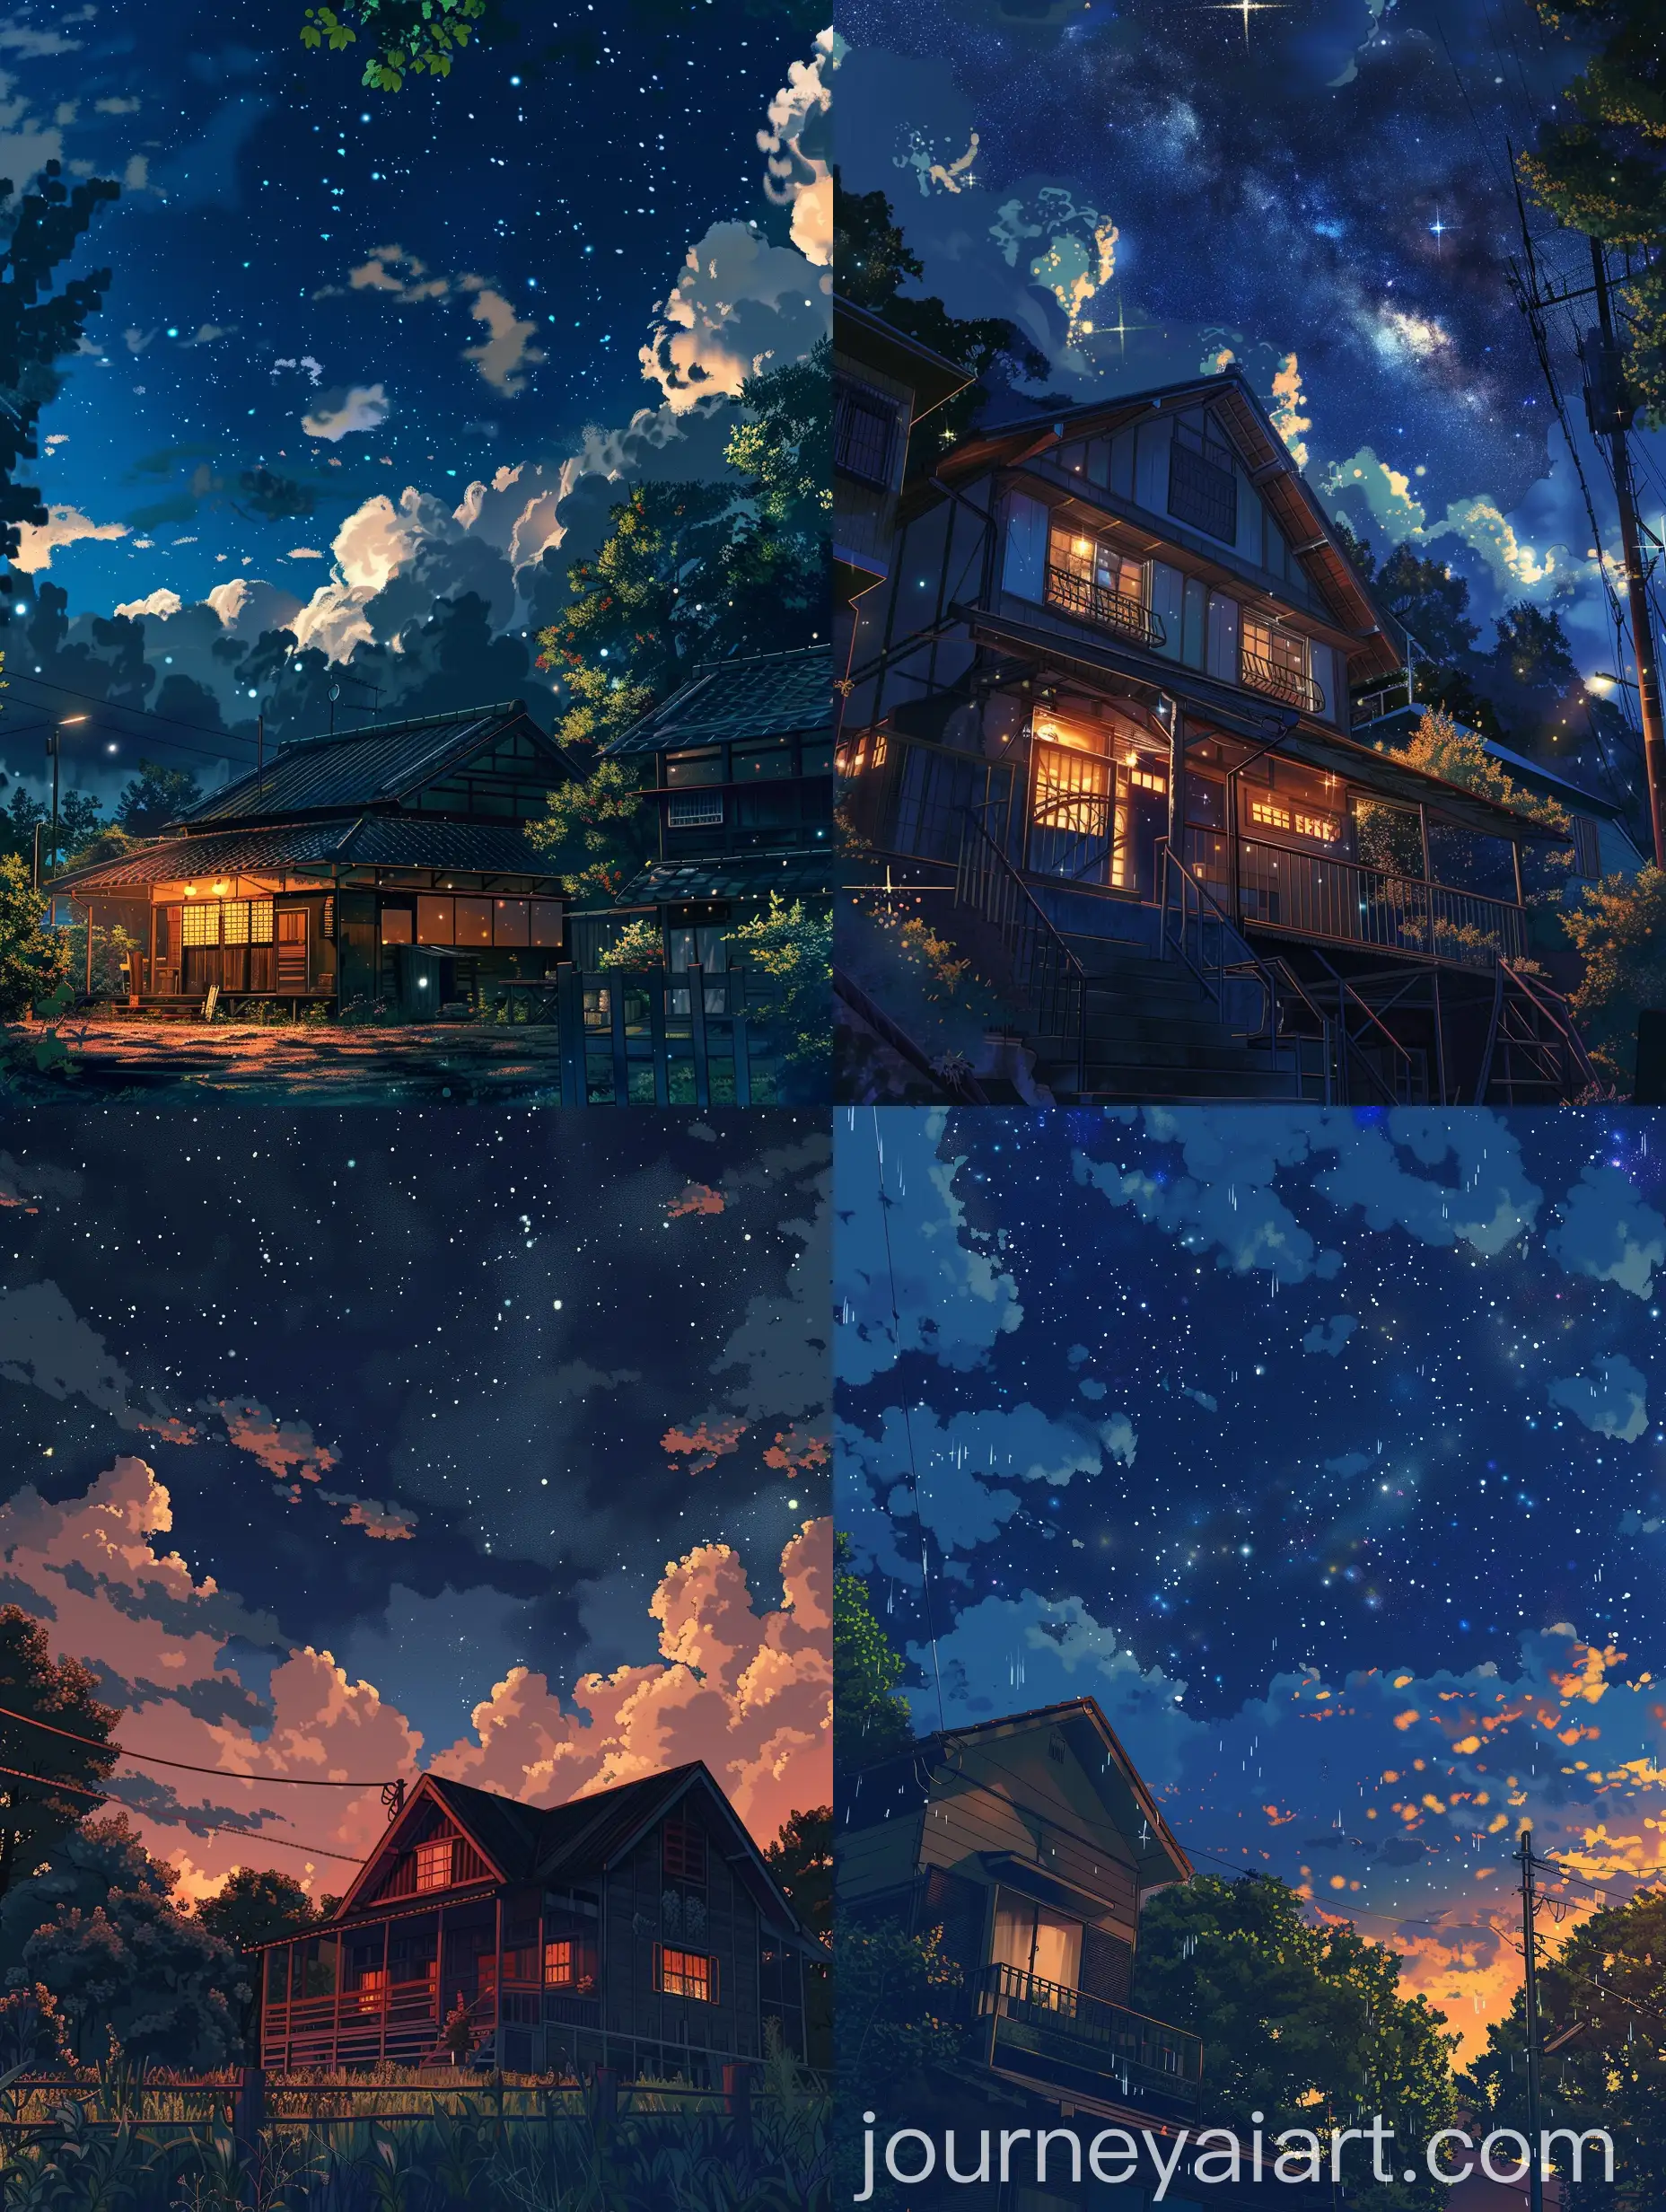 Digital-Anime-Art-of-House-with-Nighttime-Sky-and-Starry-Background